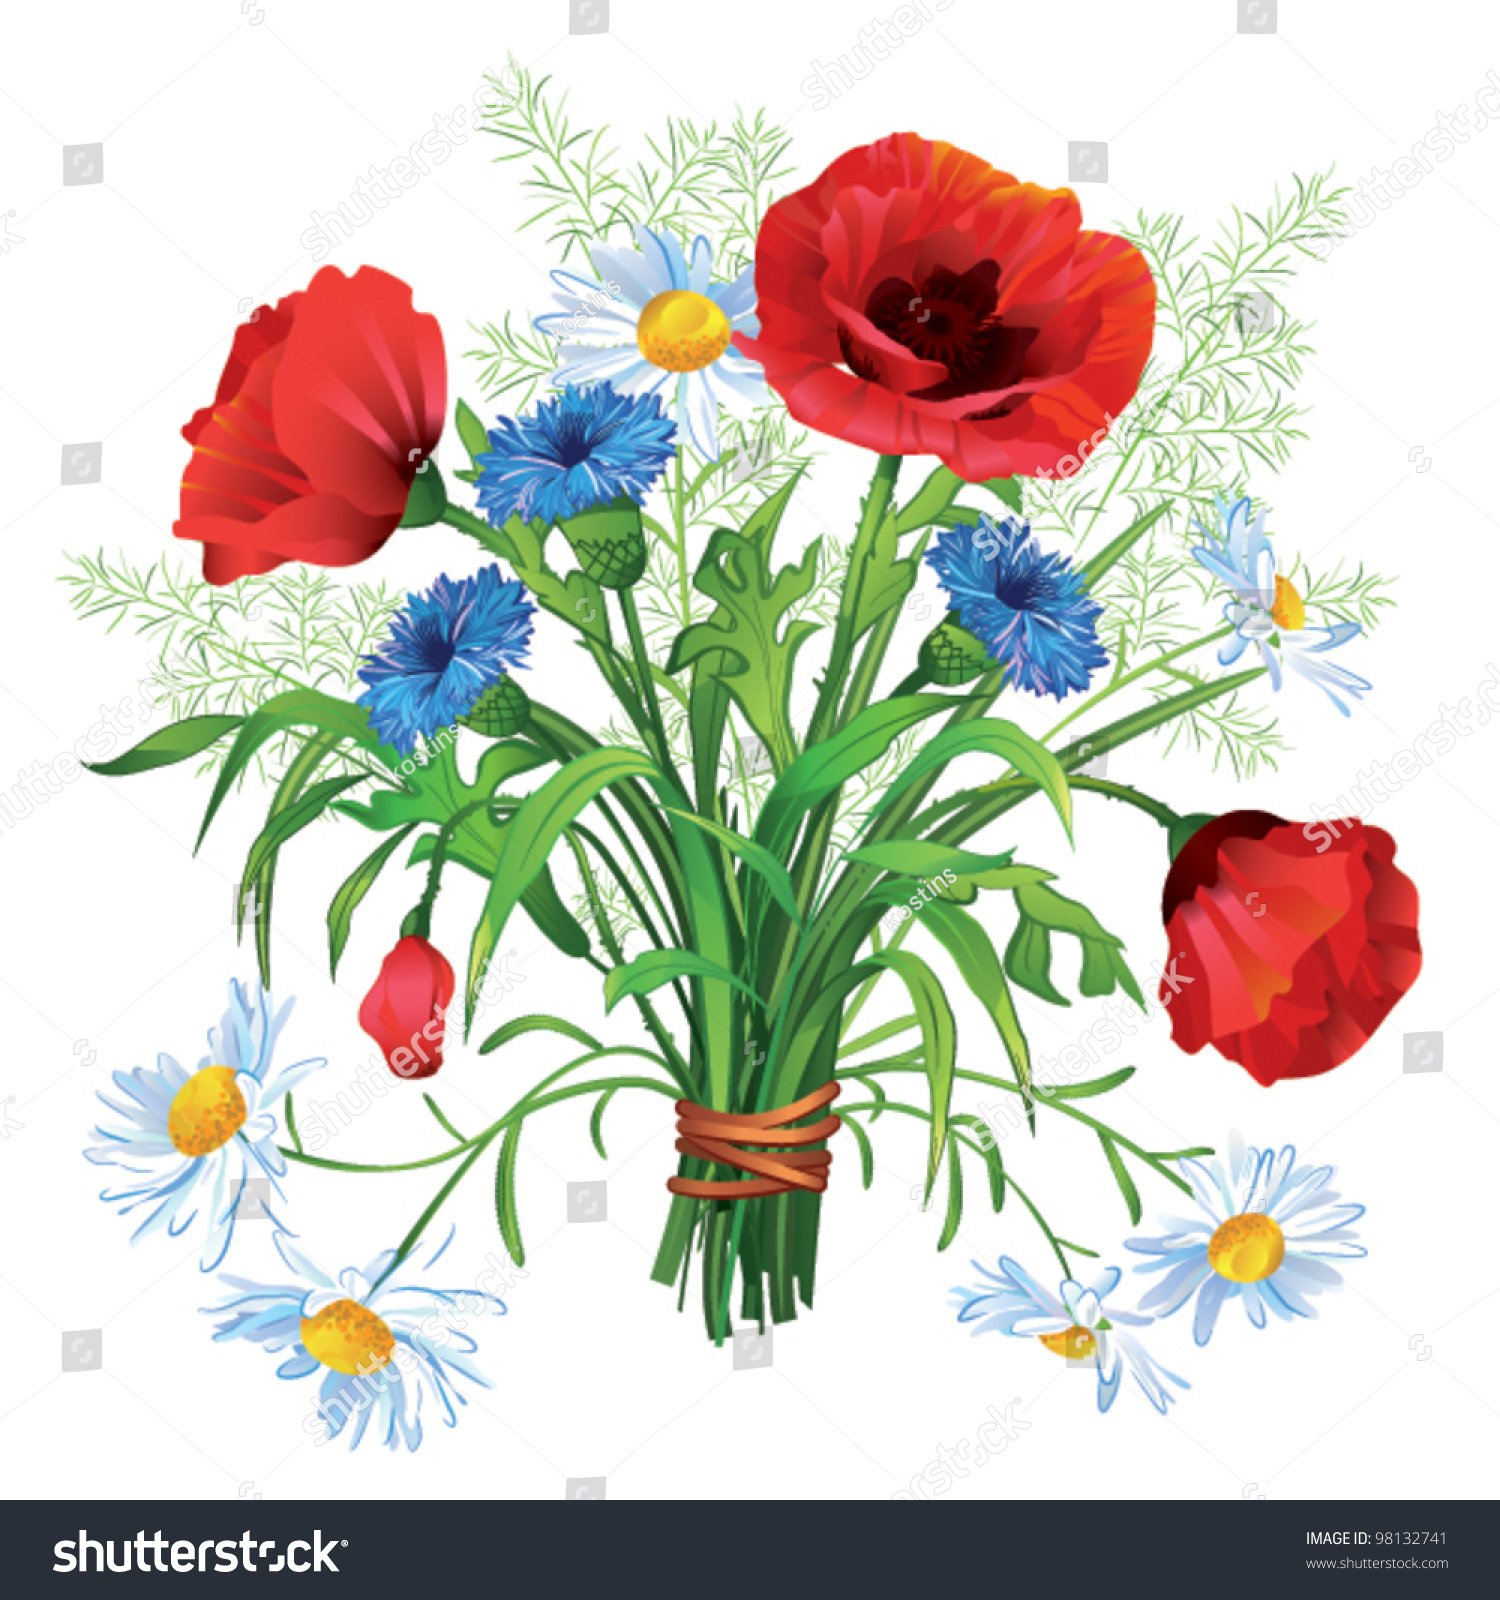 Colorful Summer Bouquet Wildflowers On White Stock Vector 98132741 ...